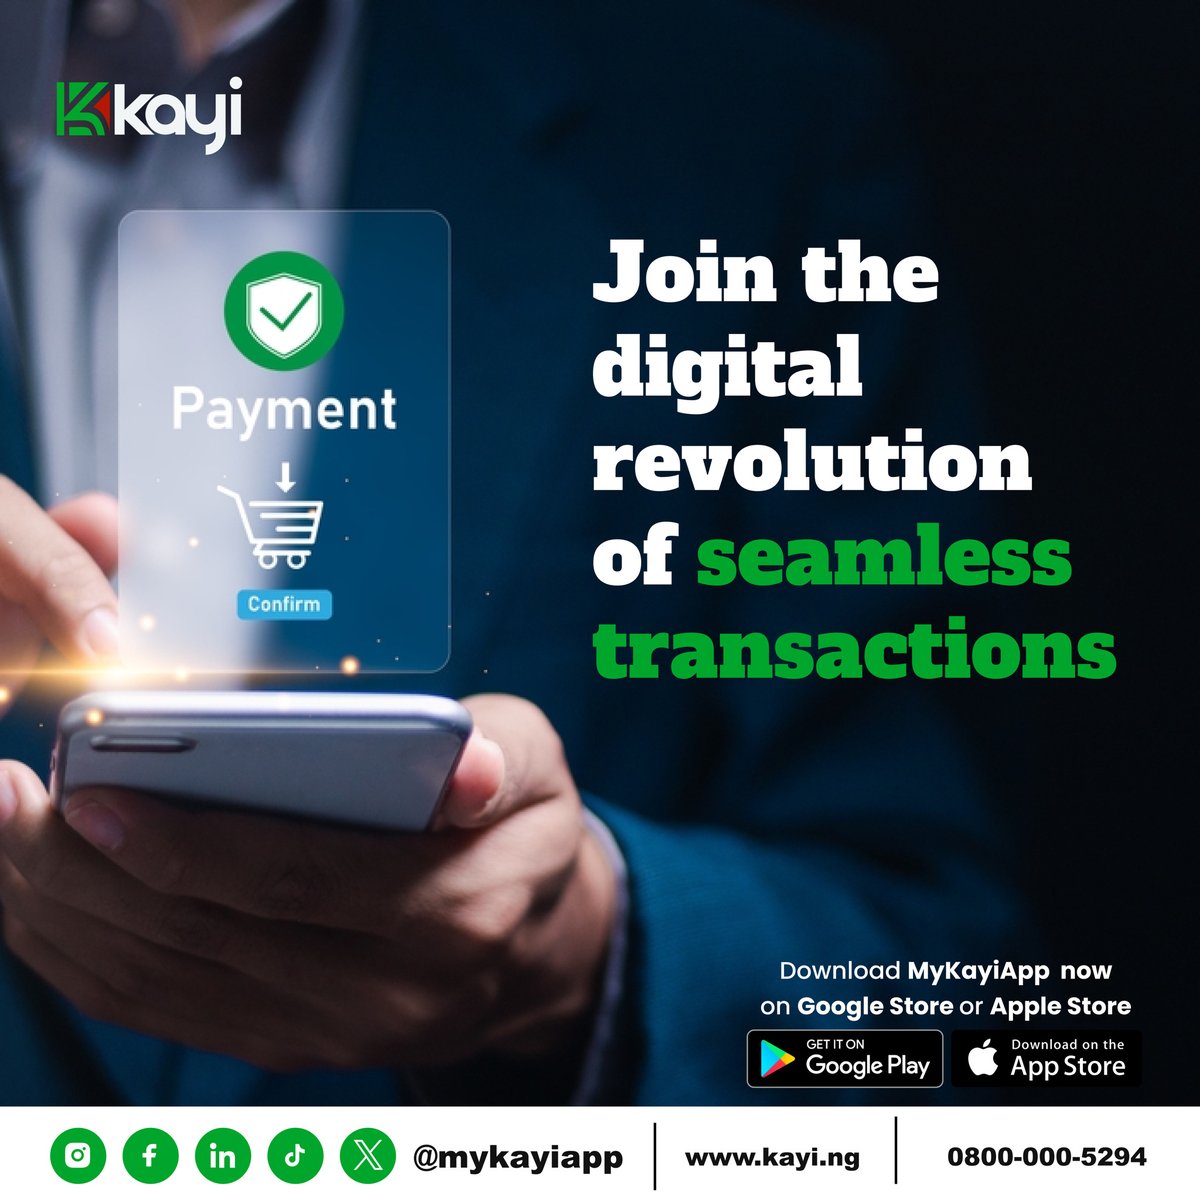 Our AI-powered technology revolutionizes your financial journey, from seamless transactions to personalized assistance. Join the digital banking revolution now. Download the Kayiapp on Play store and Apple store.

#MyKayiApp #NowLive #Kayiway #DownloadNow #downloadmykayiapp